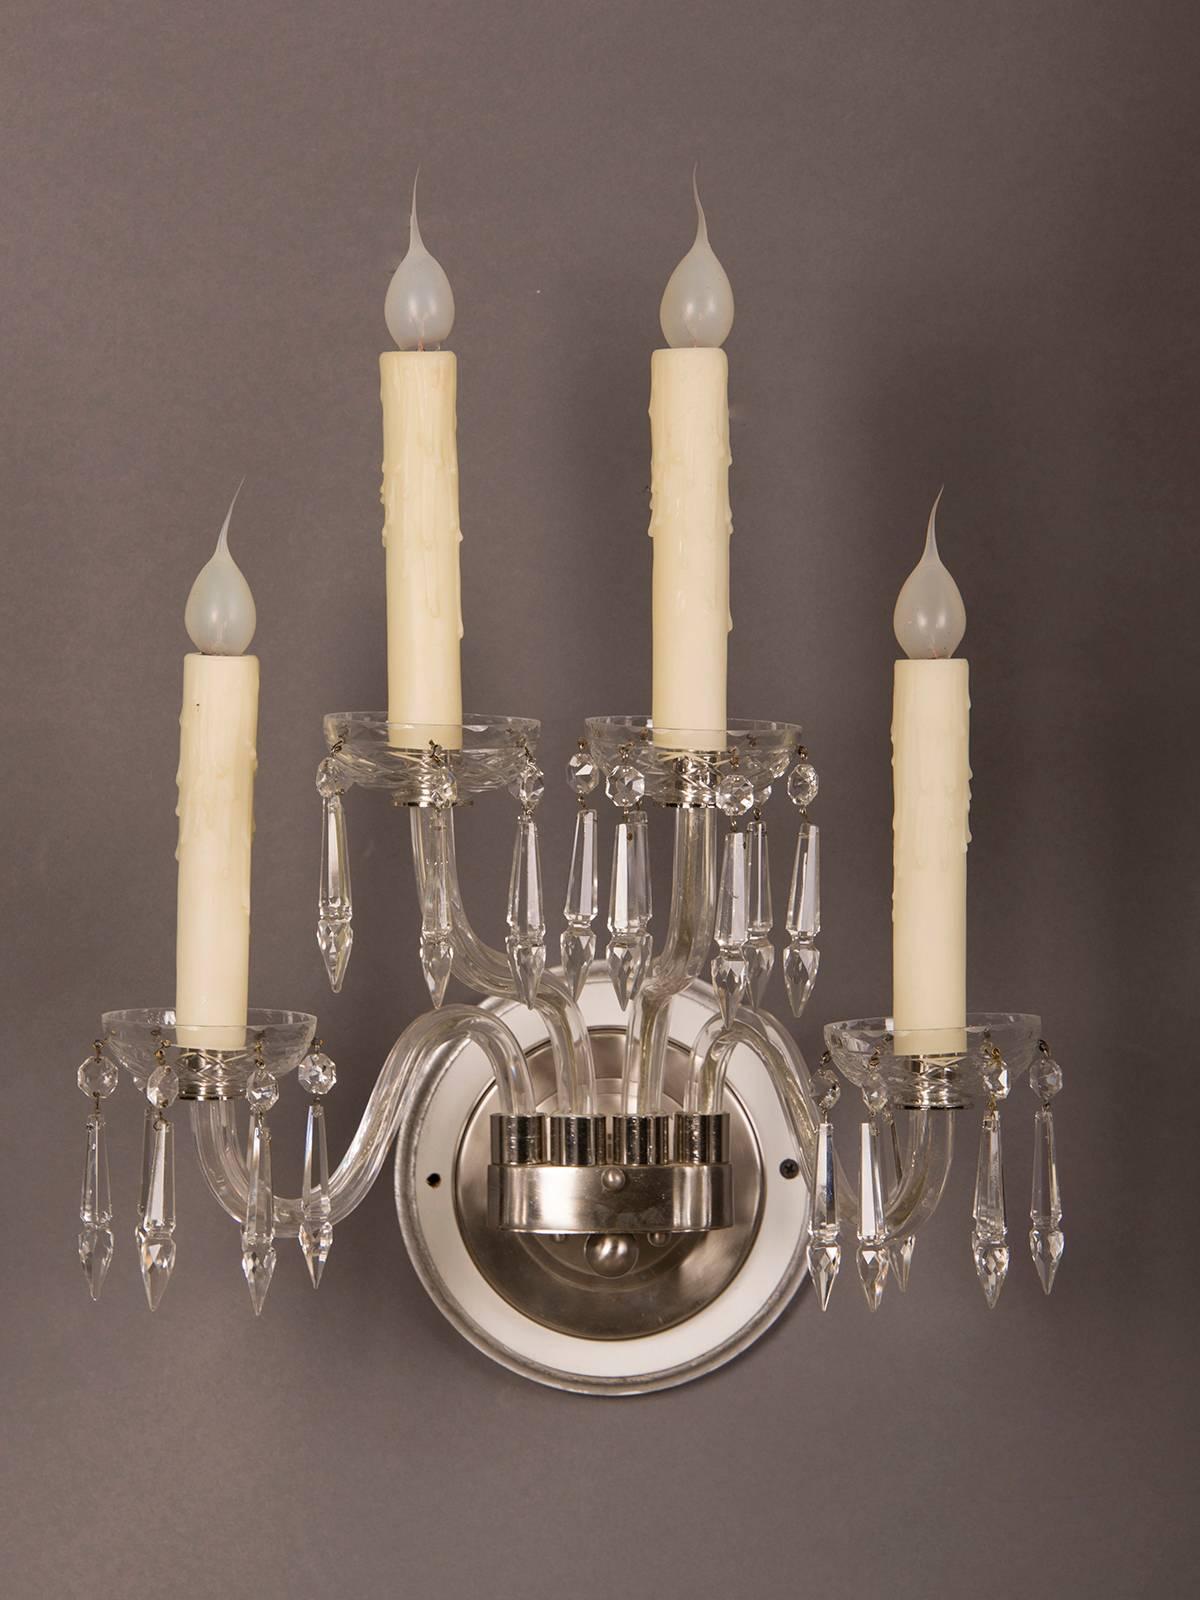 A pair of vintage George III style four arm cut-glass sconces set with a nickel frame from England, circa 1940. Please look at the elegant profile of these sconces that follow the original eighteenth century examples but with a modern simplicity